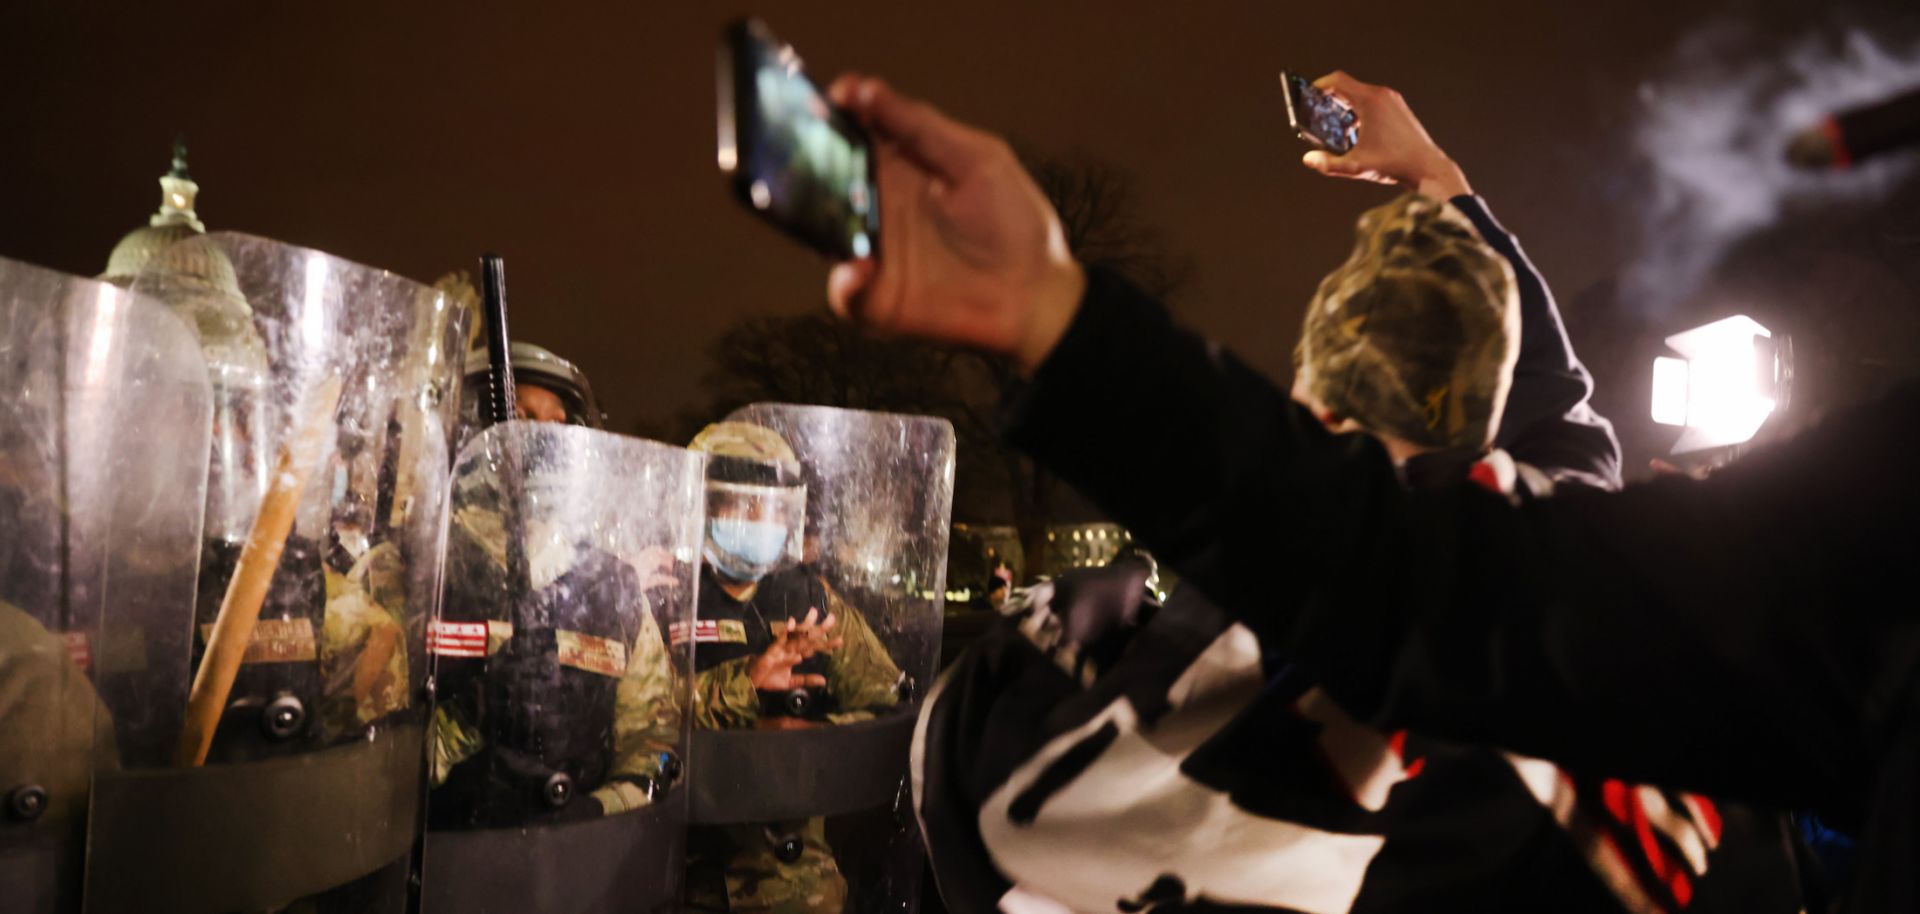 Members of the National Guard and the District of Columbia police keep a small group of protesters at bay after thousands of Trump supporters stormed the Capitol building following a 'Stop the Steal' rally on Jan. 6, 2021, in Washington.